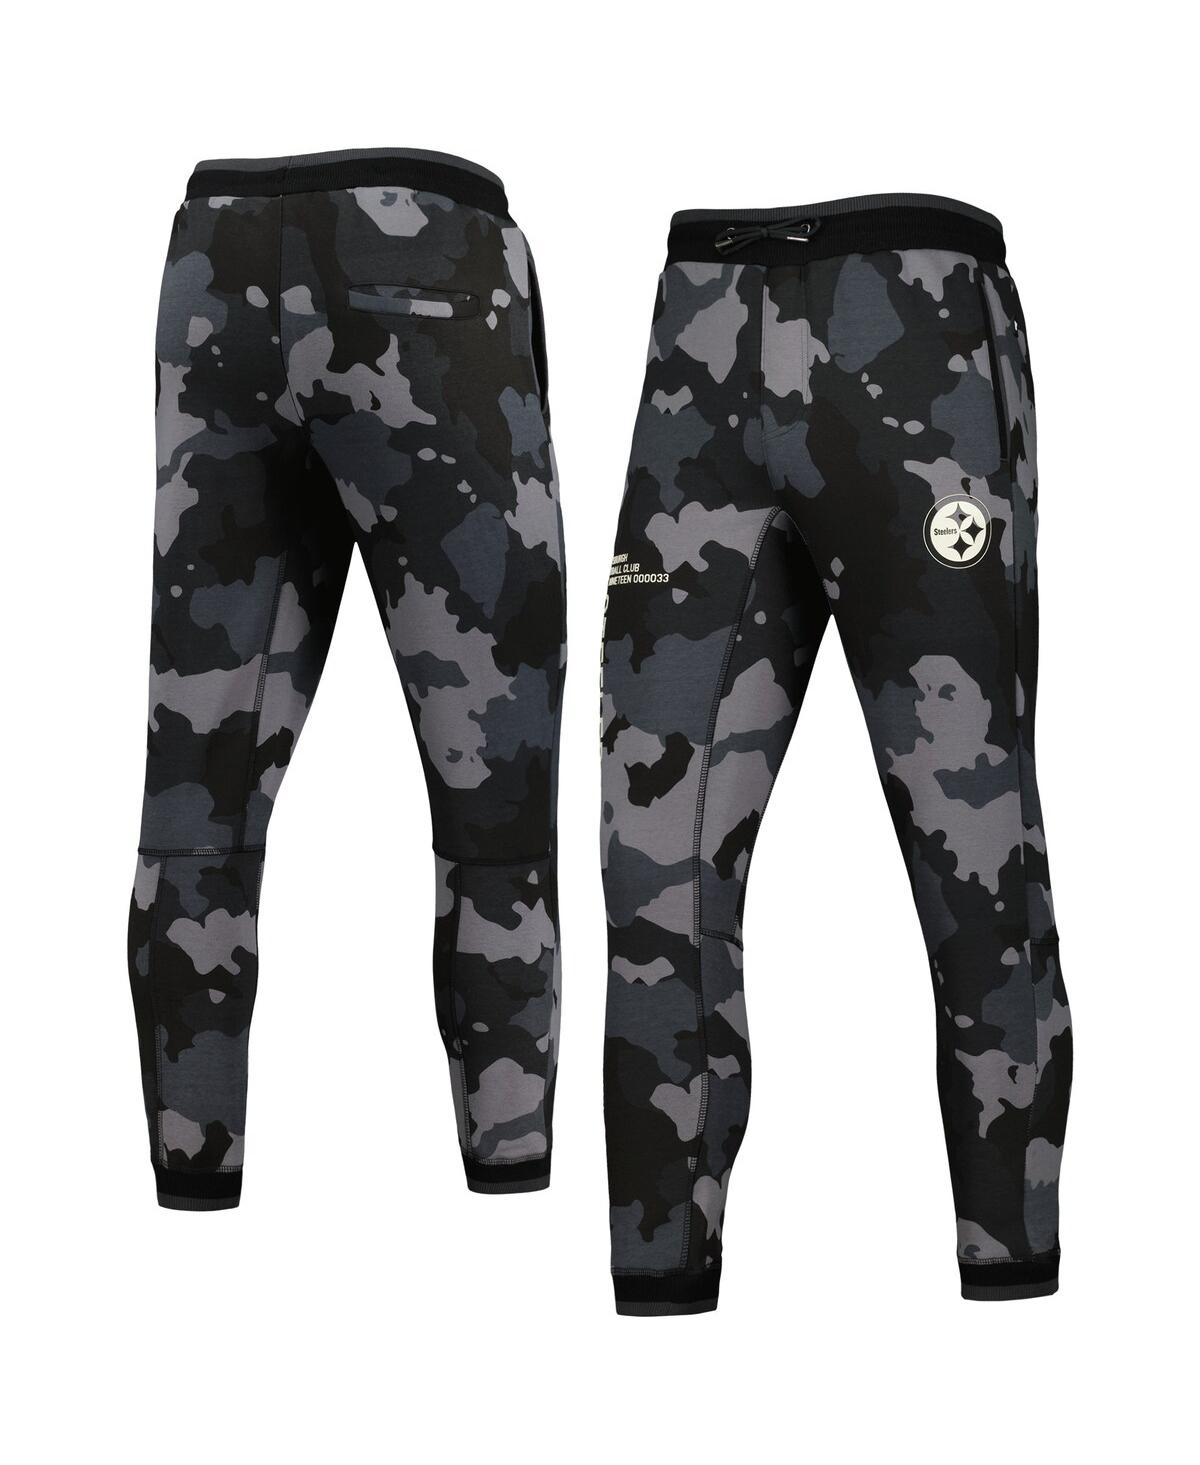 Shop The Wild Collective Men's And Women's  Black Pittsburgh Steelers Camo Jogger Pants